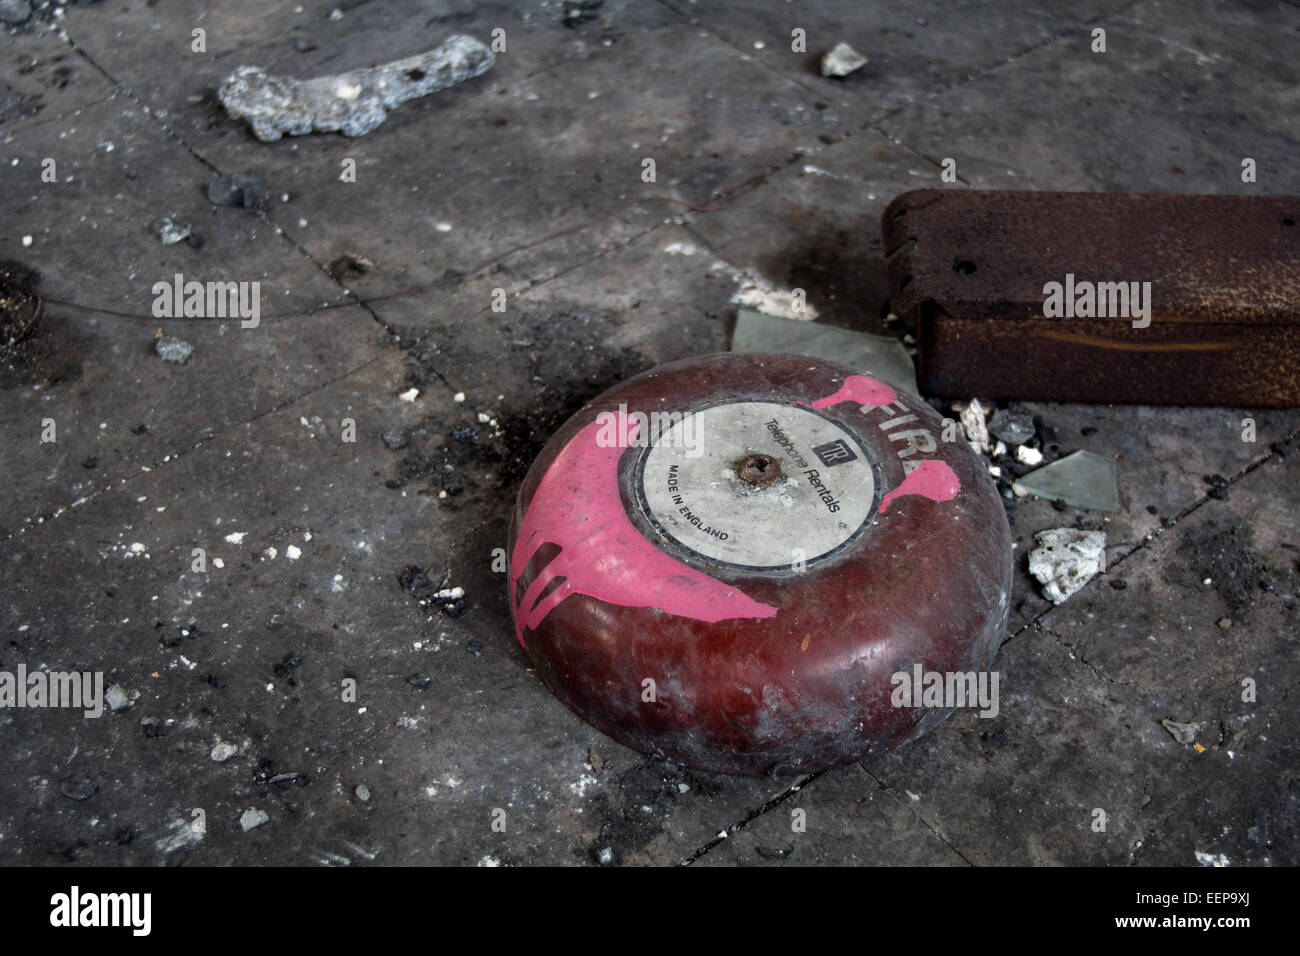 Ironic - A Charred Fire Bell Stock Photo